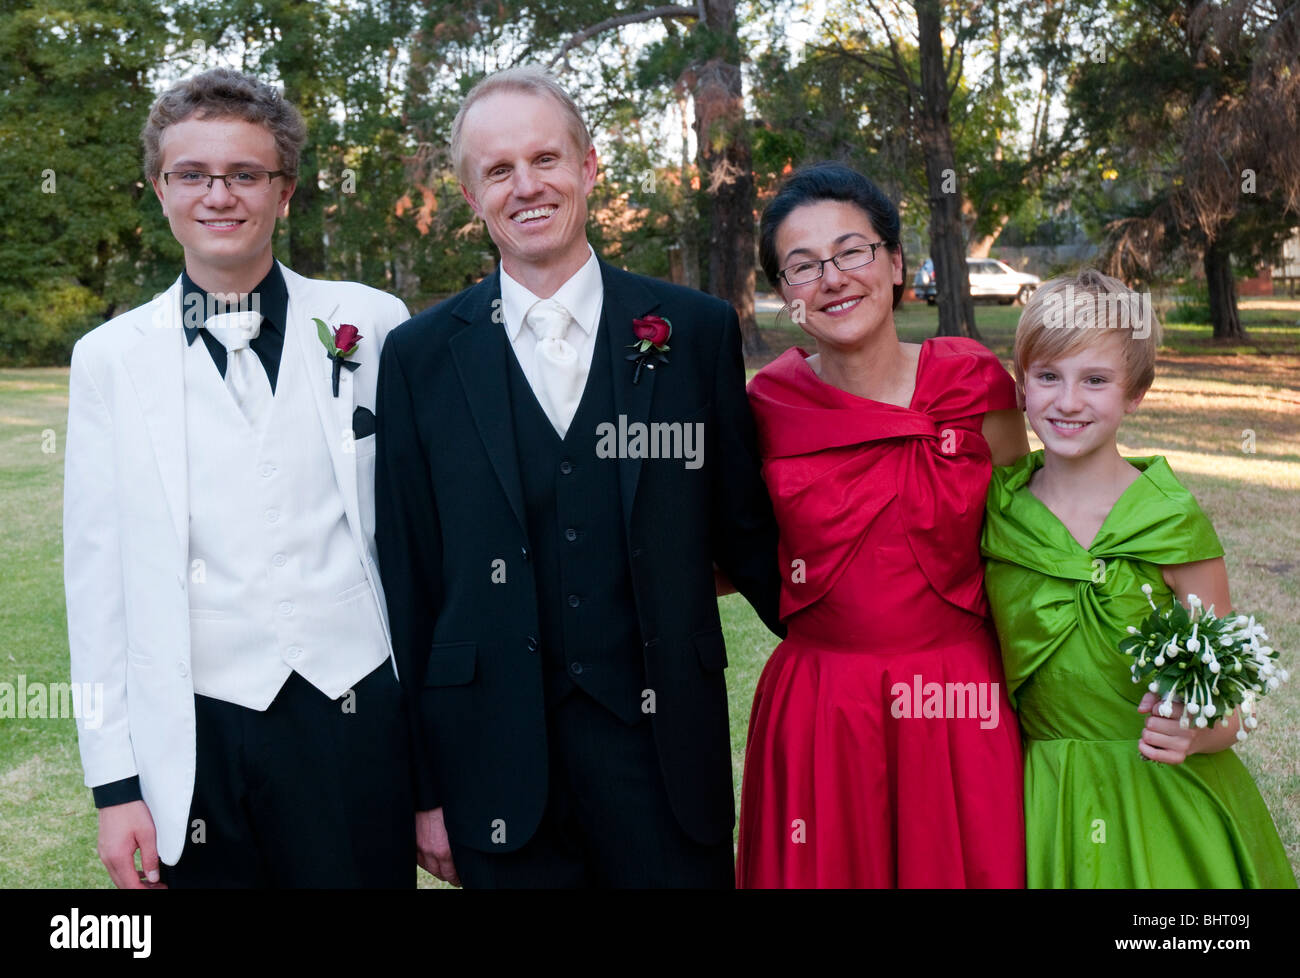 Family at a wedding bride groom and their children Stock Photo